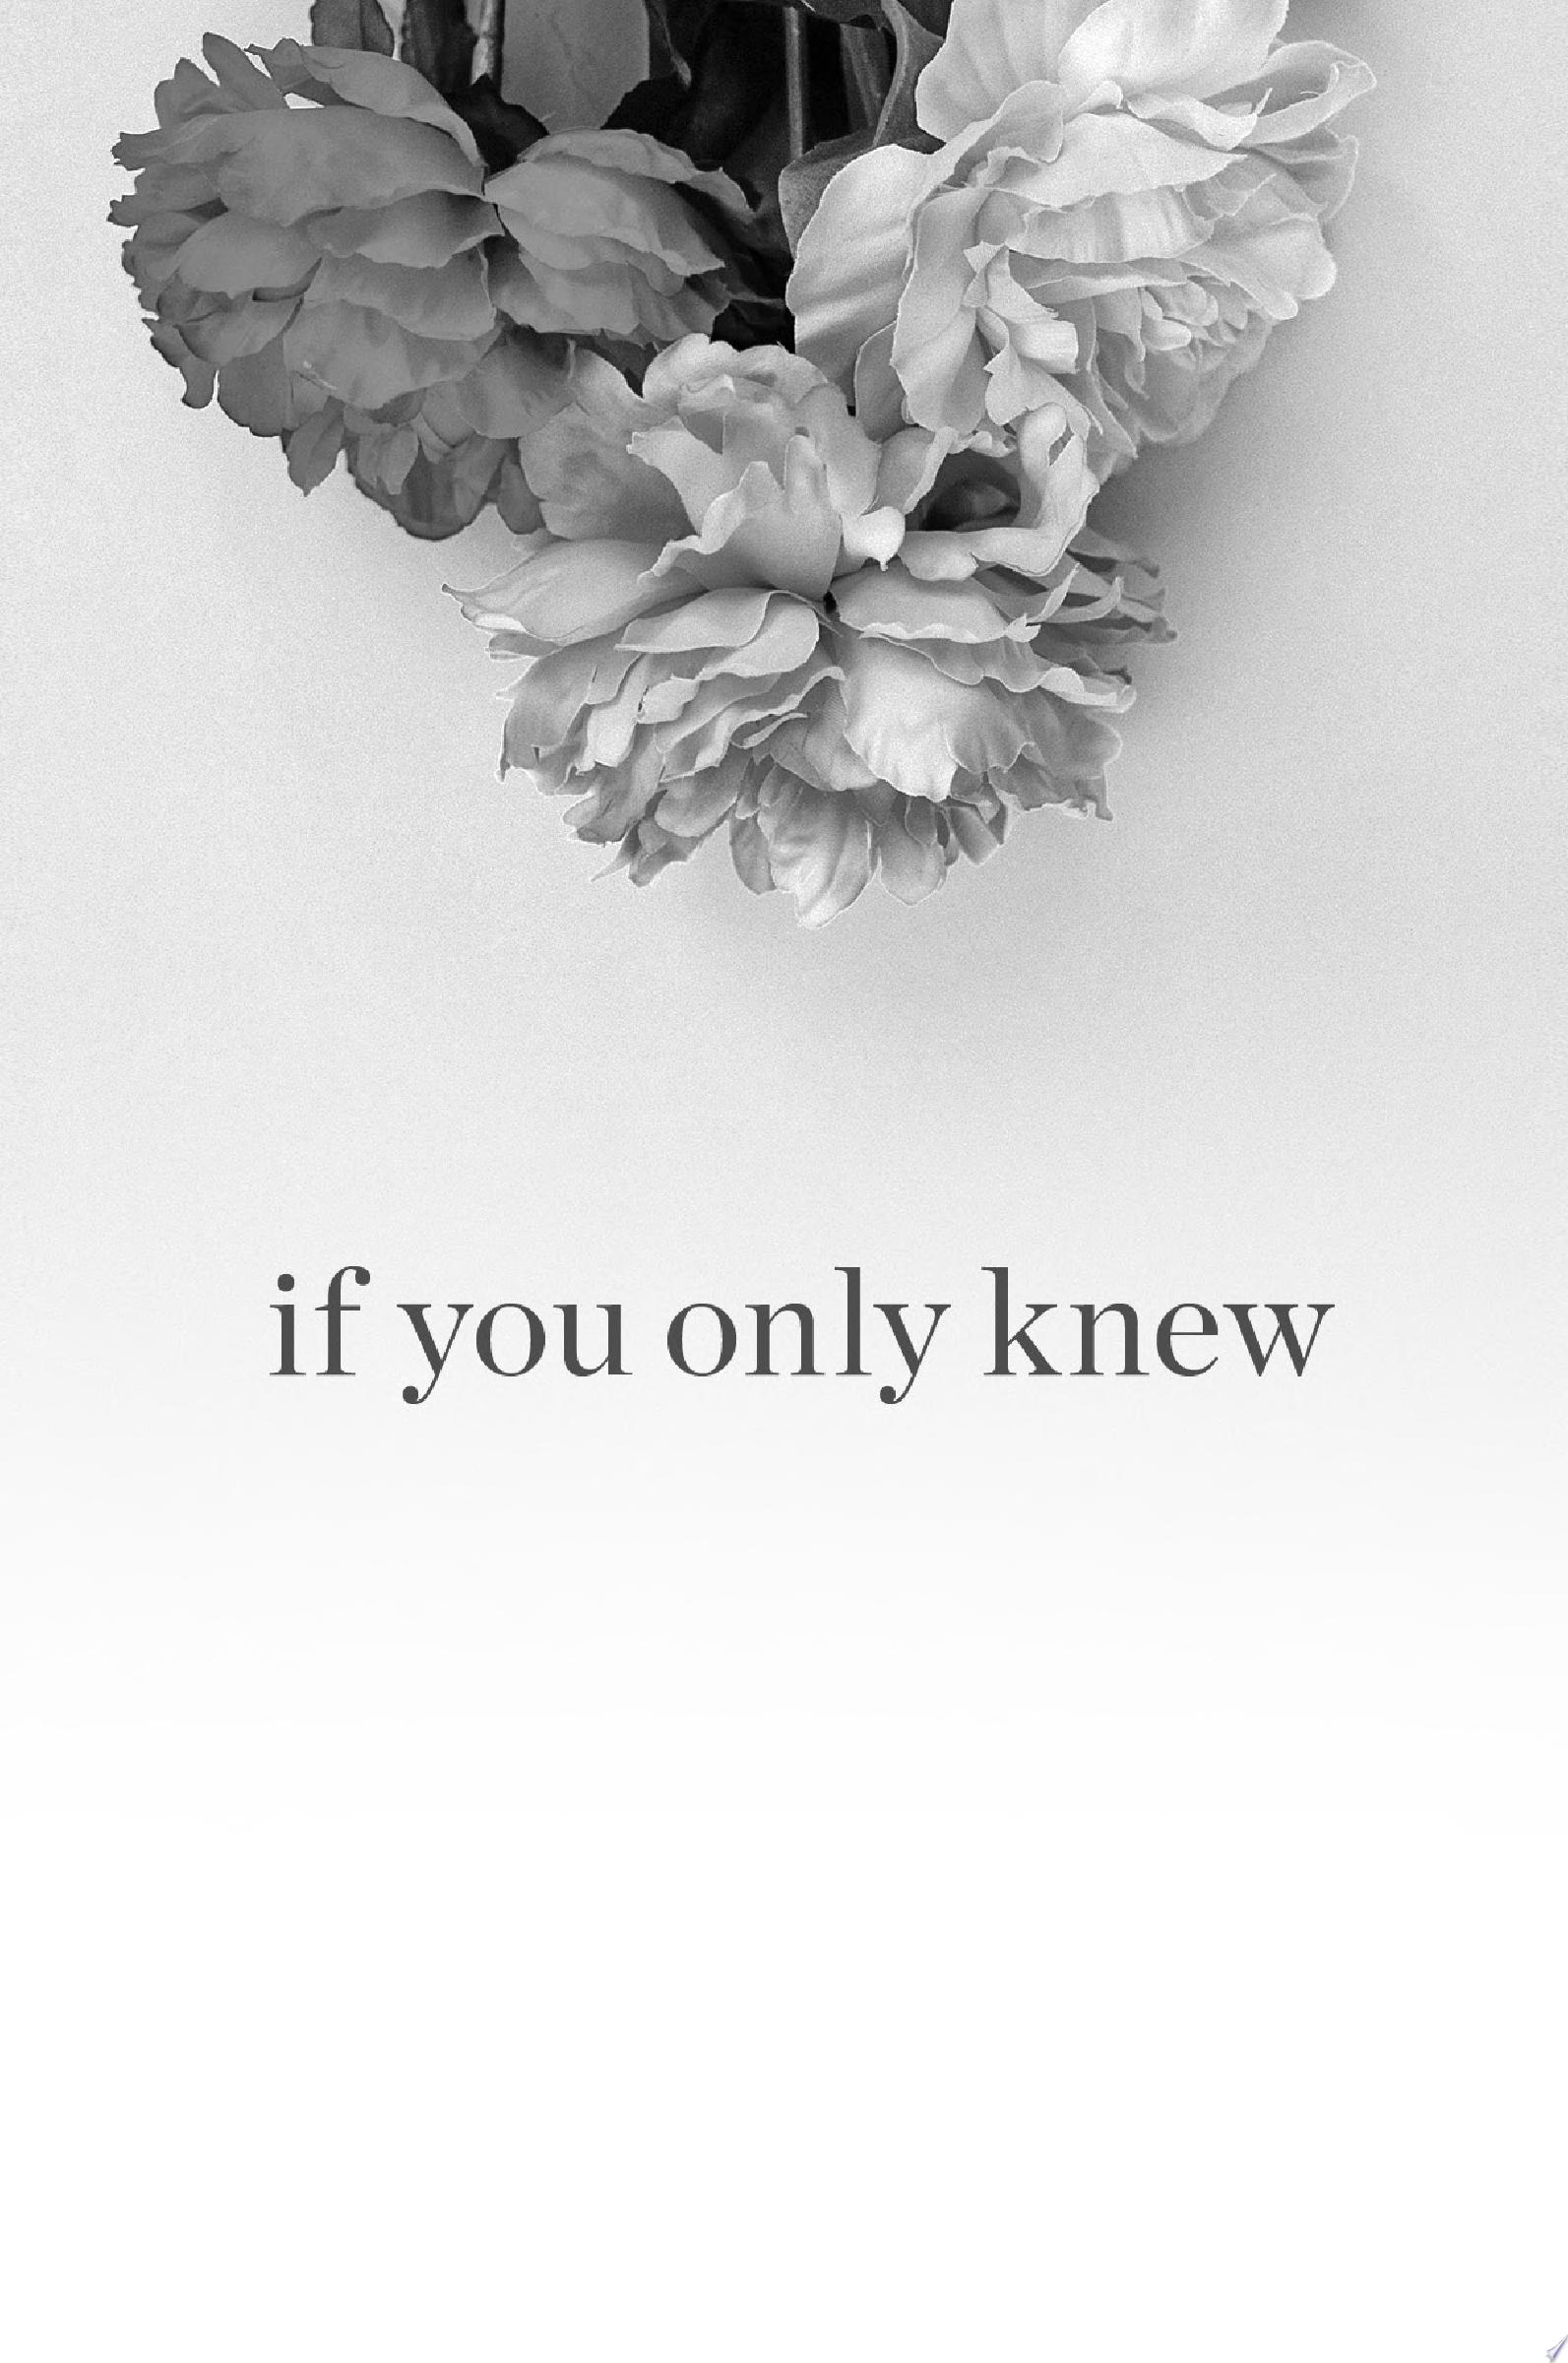 Image for "If You Only Knew"